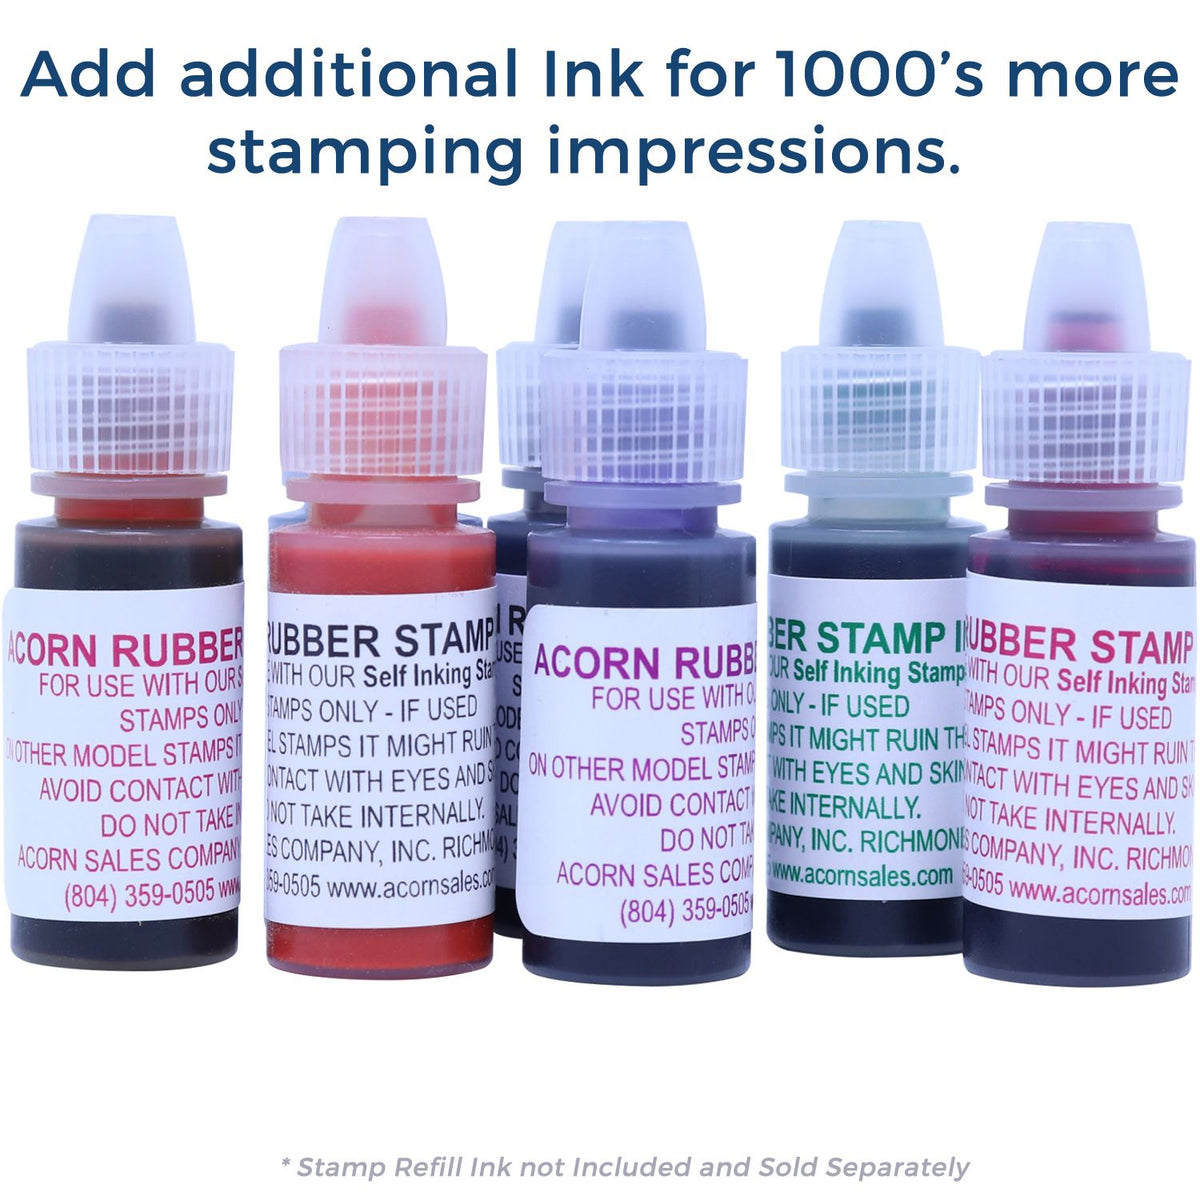 Refill Ink for Self-Inking Round Arrow Stamp Available